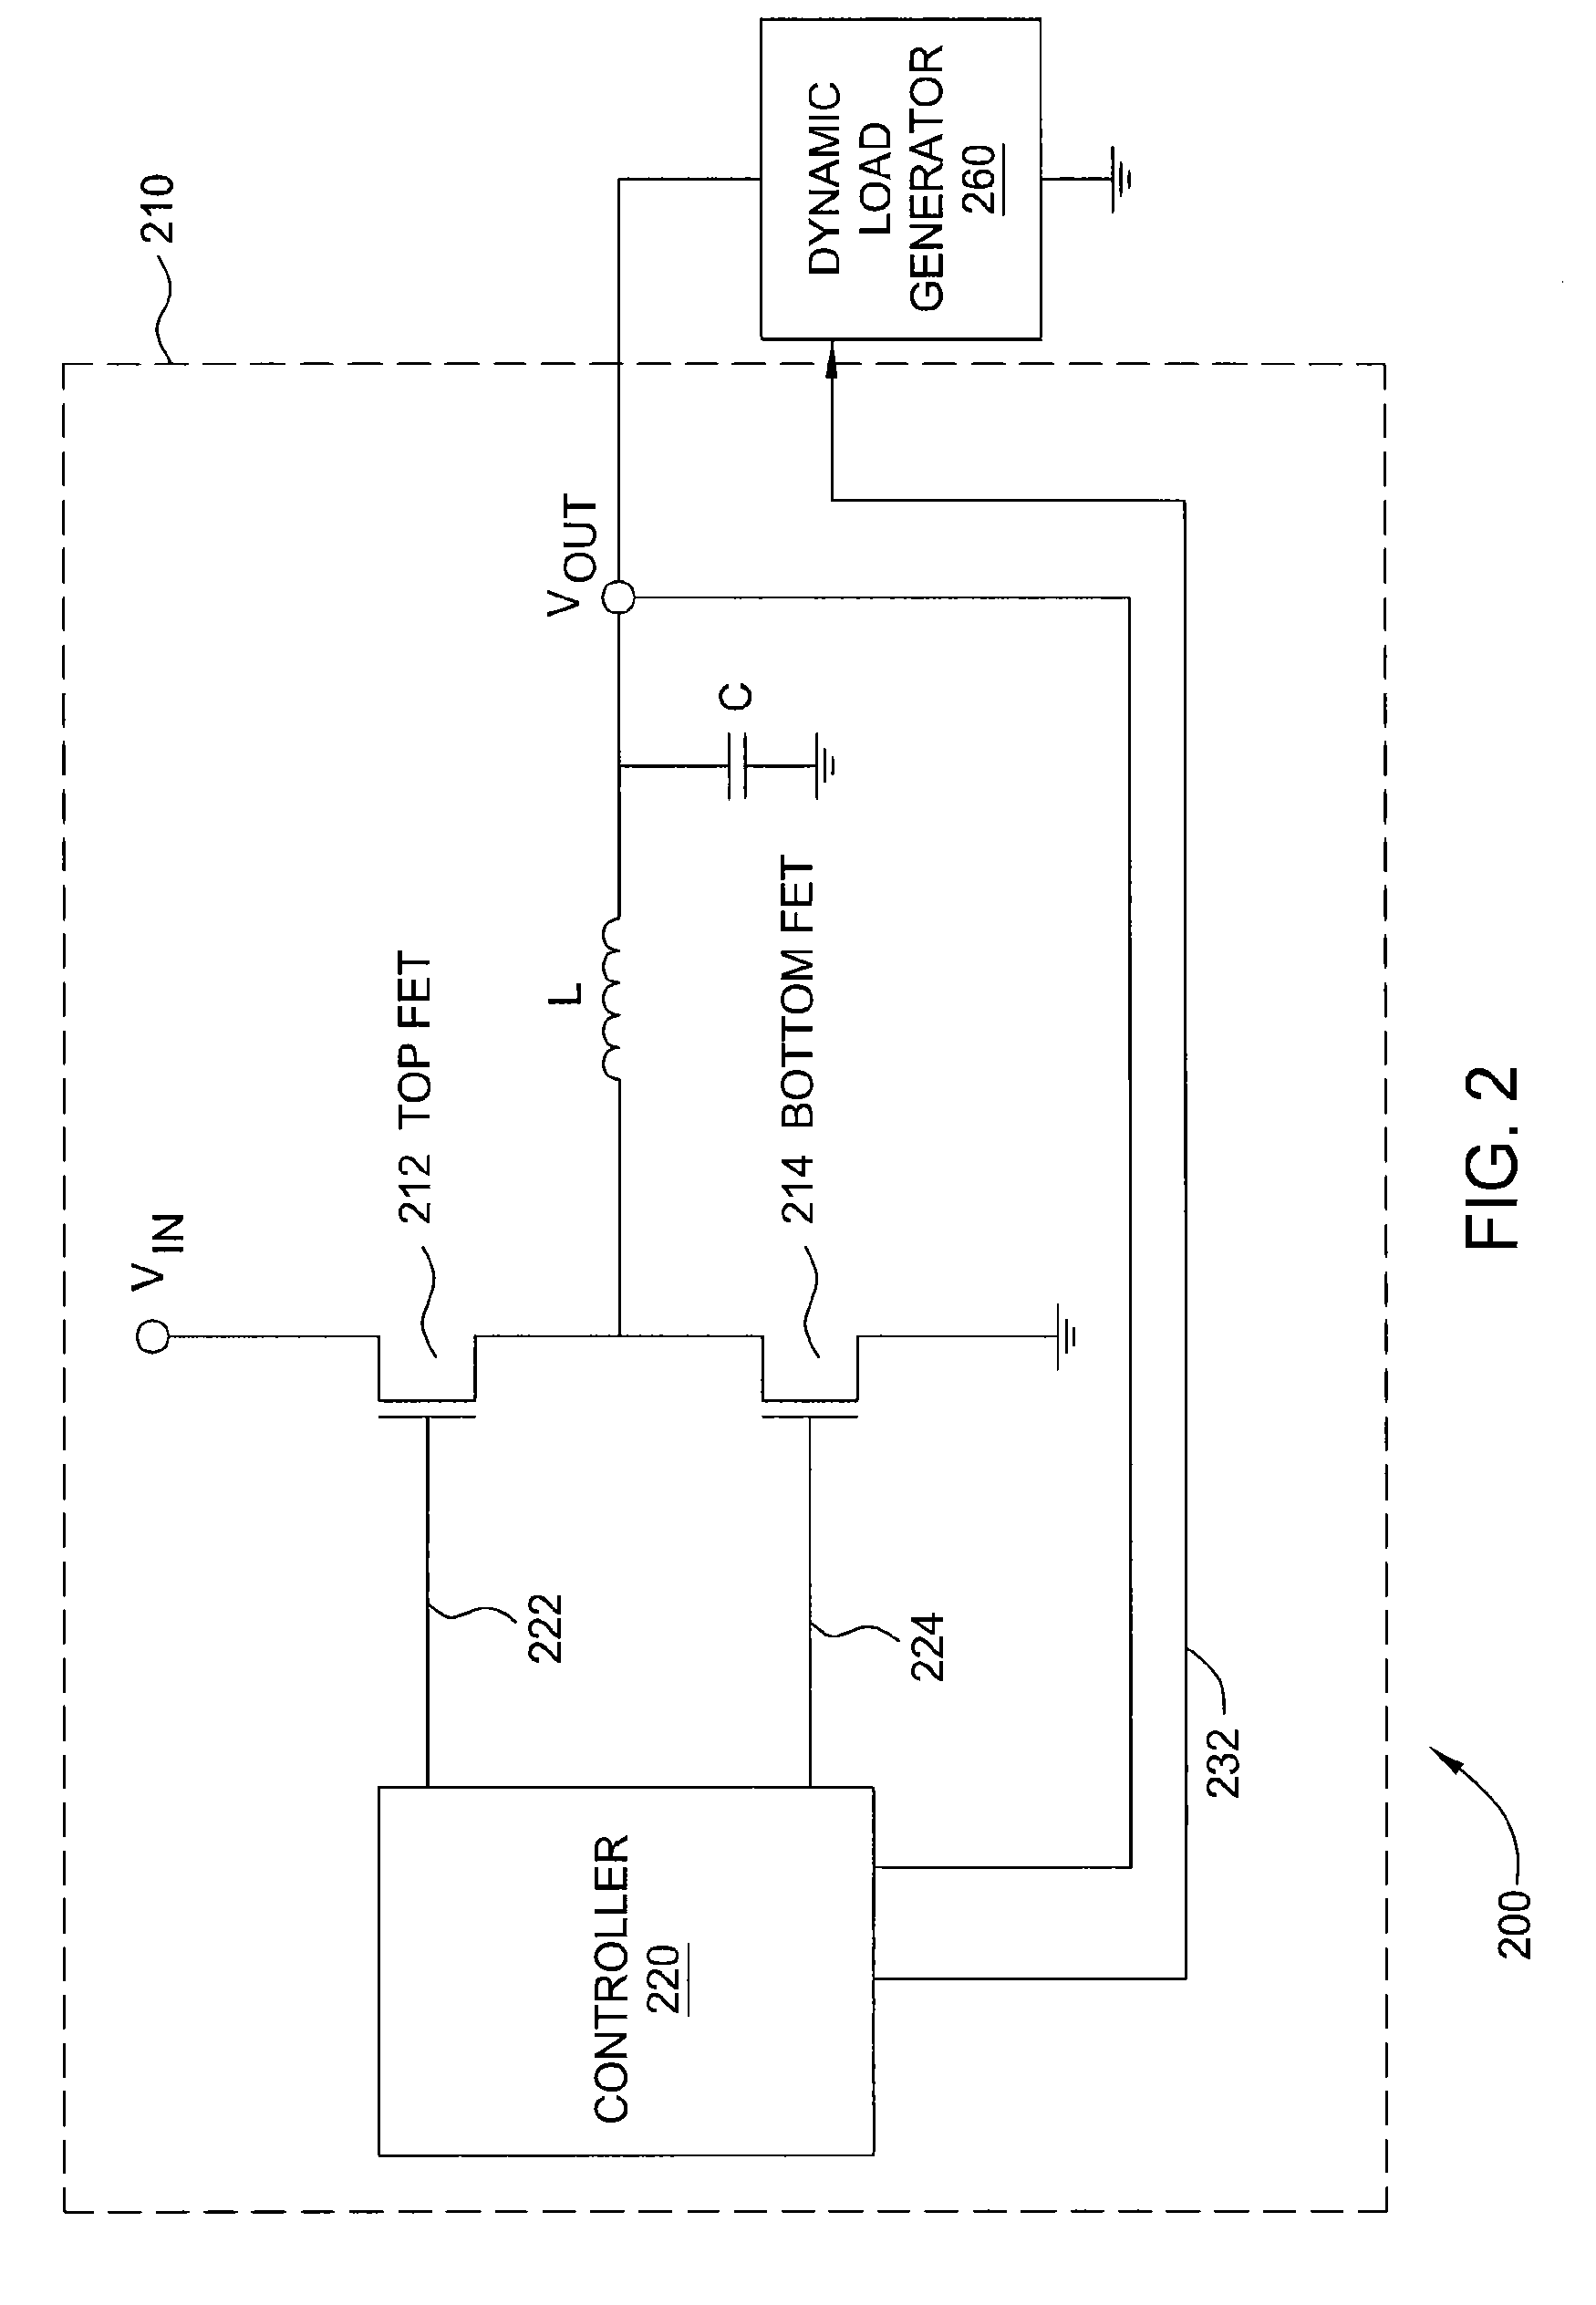 System and method for testing worst case transients in a switching-mode power supply